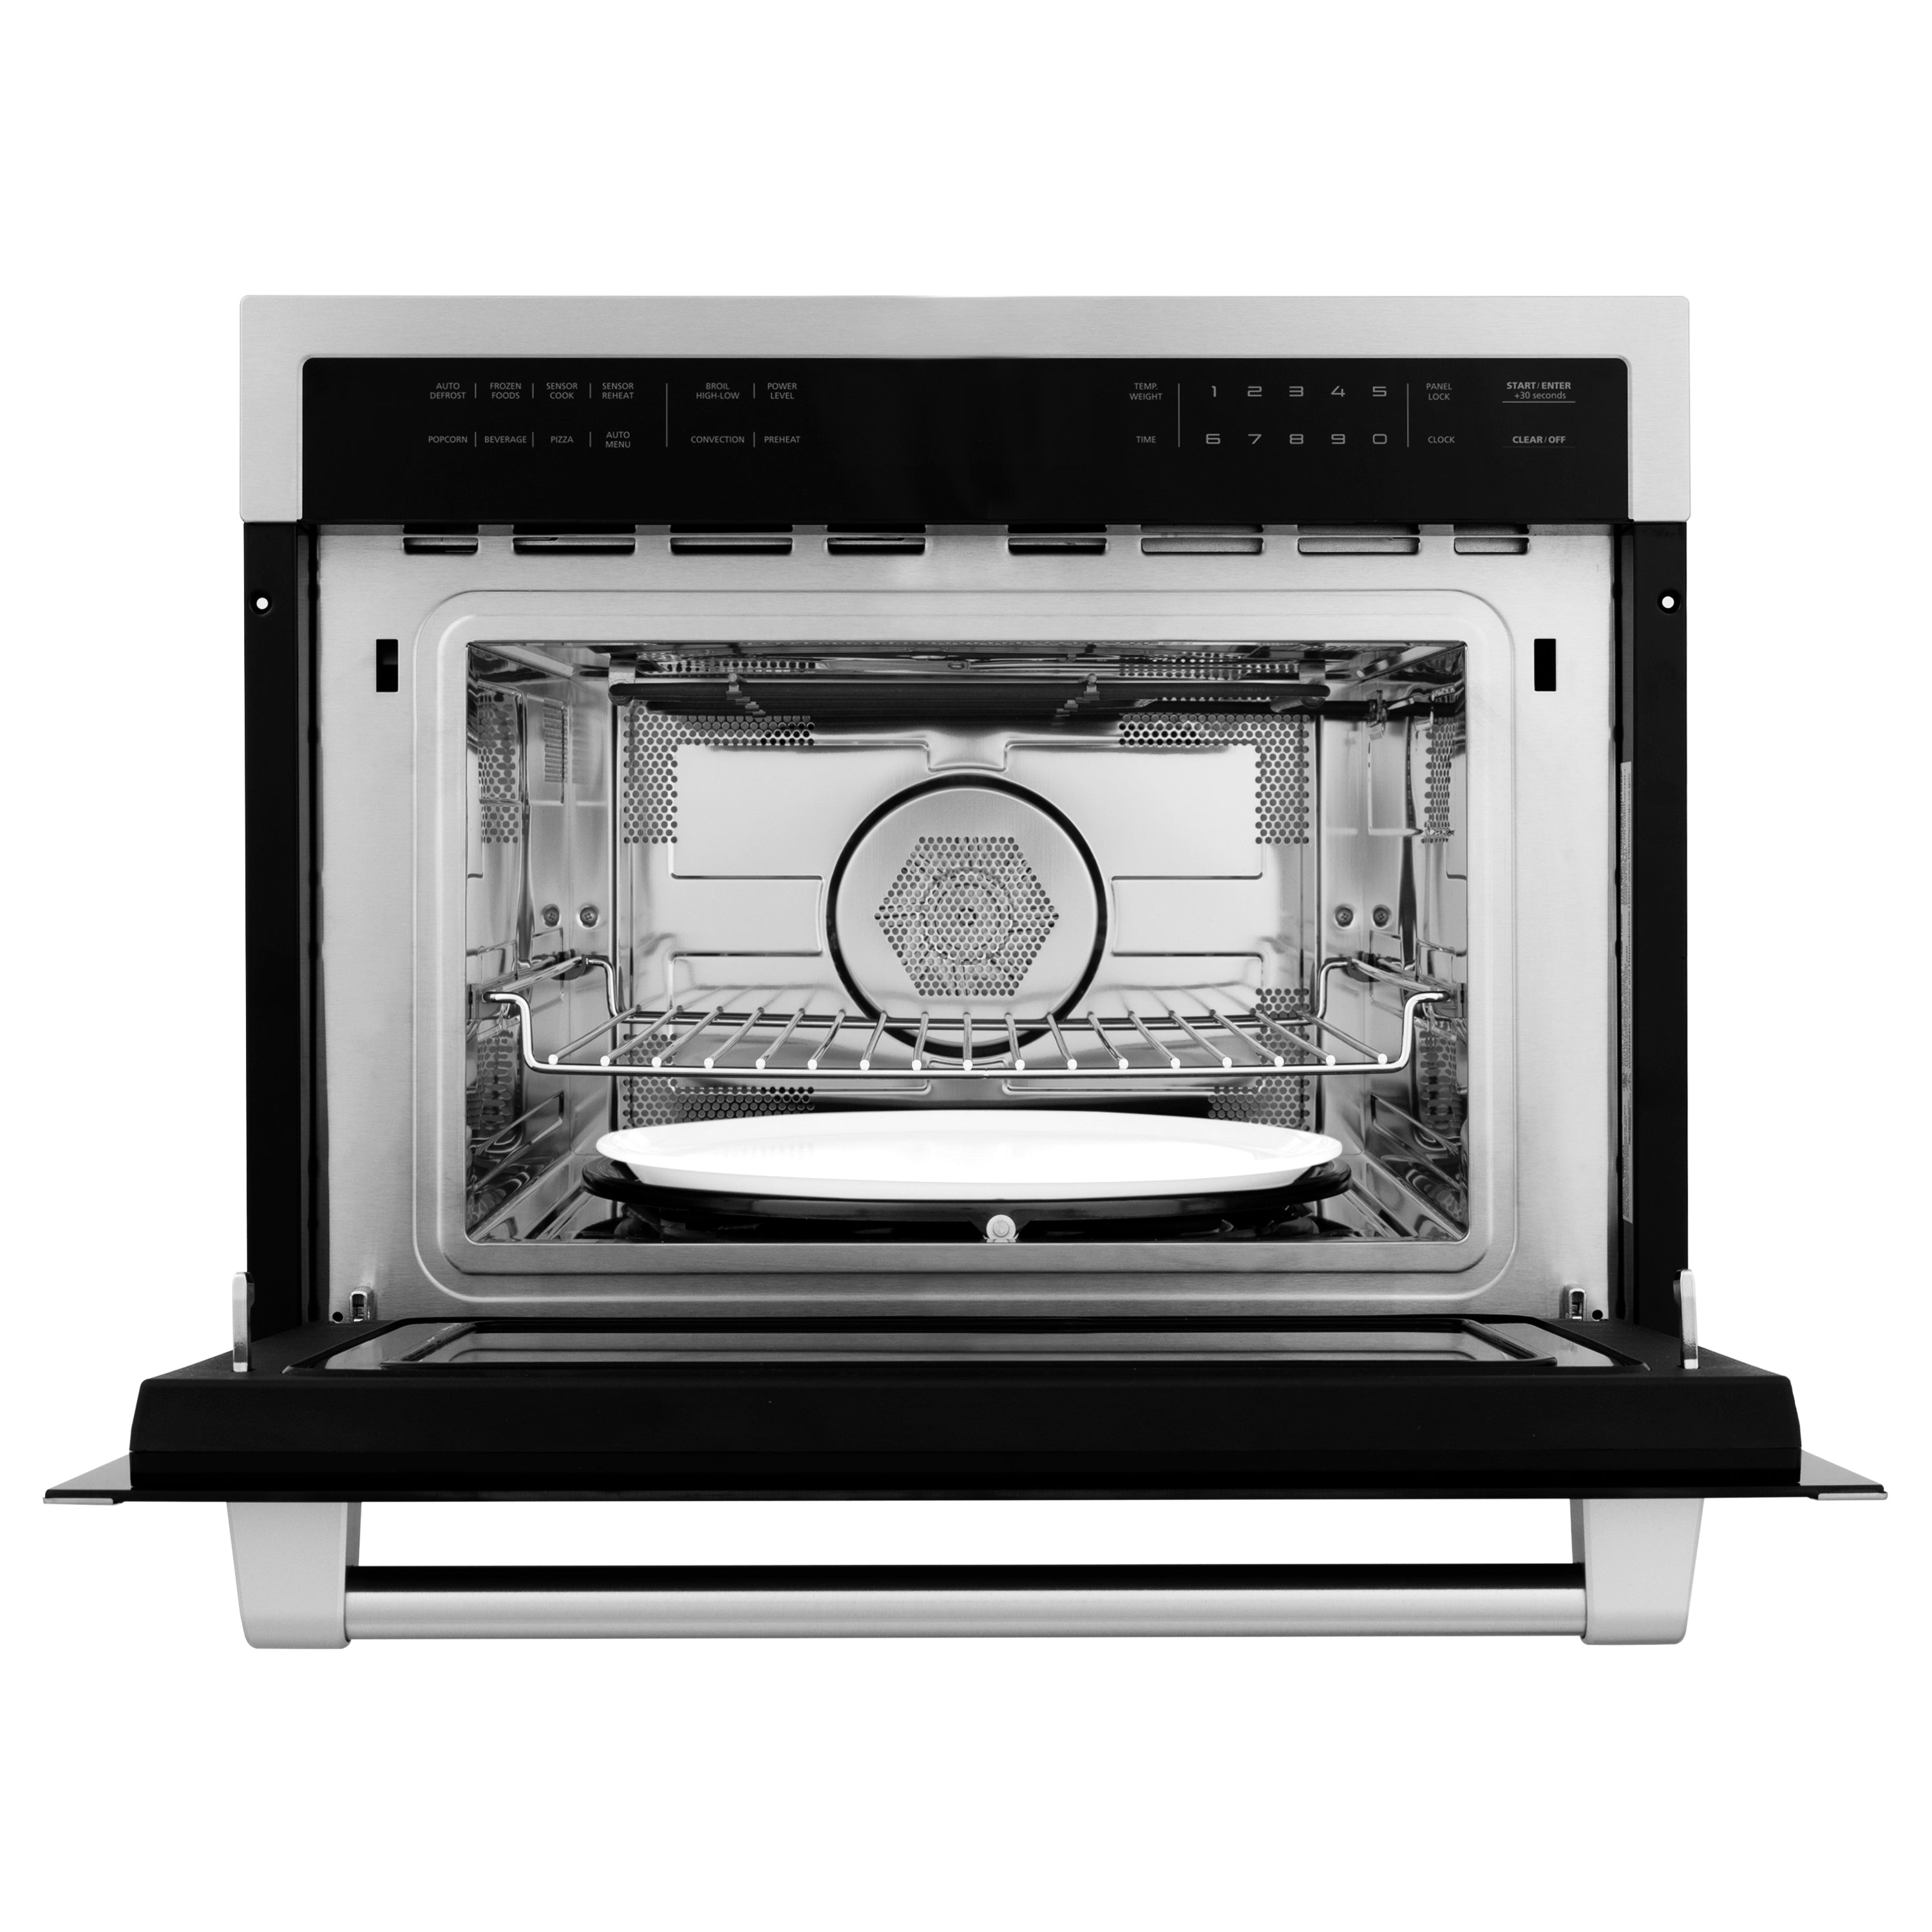 ZLINE 24" 1.6 cu ft. Built-in Convection Microwave Oven in Stainless Steel with Speed and Sensor Cooking